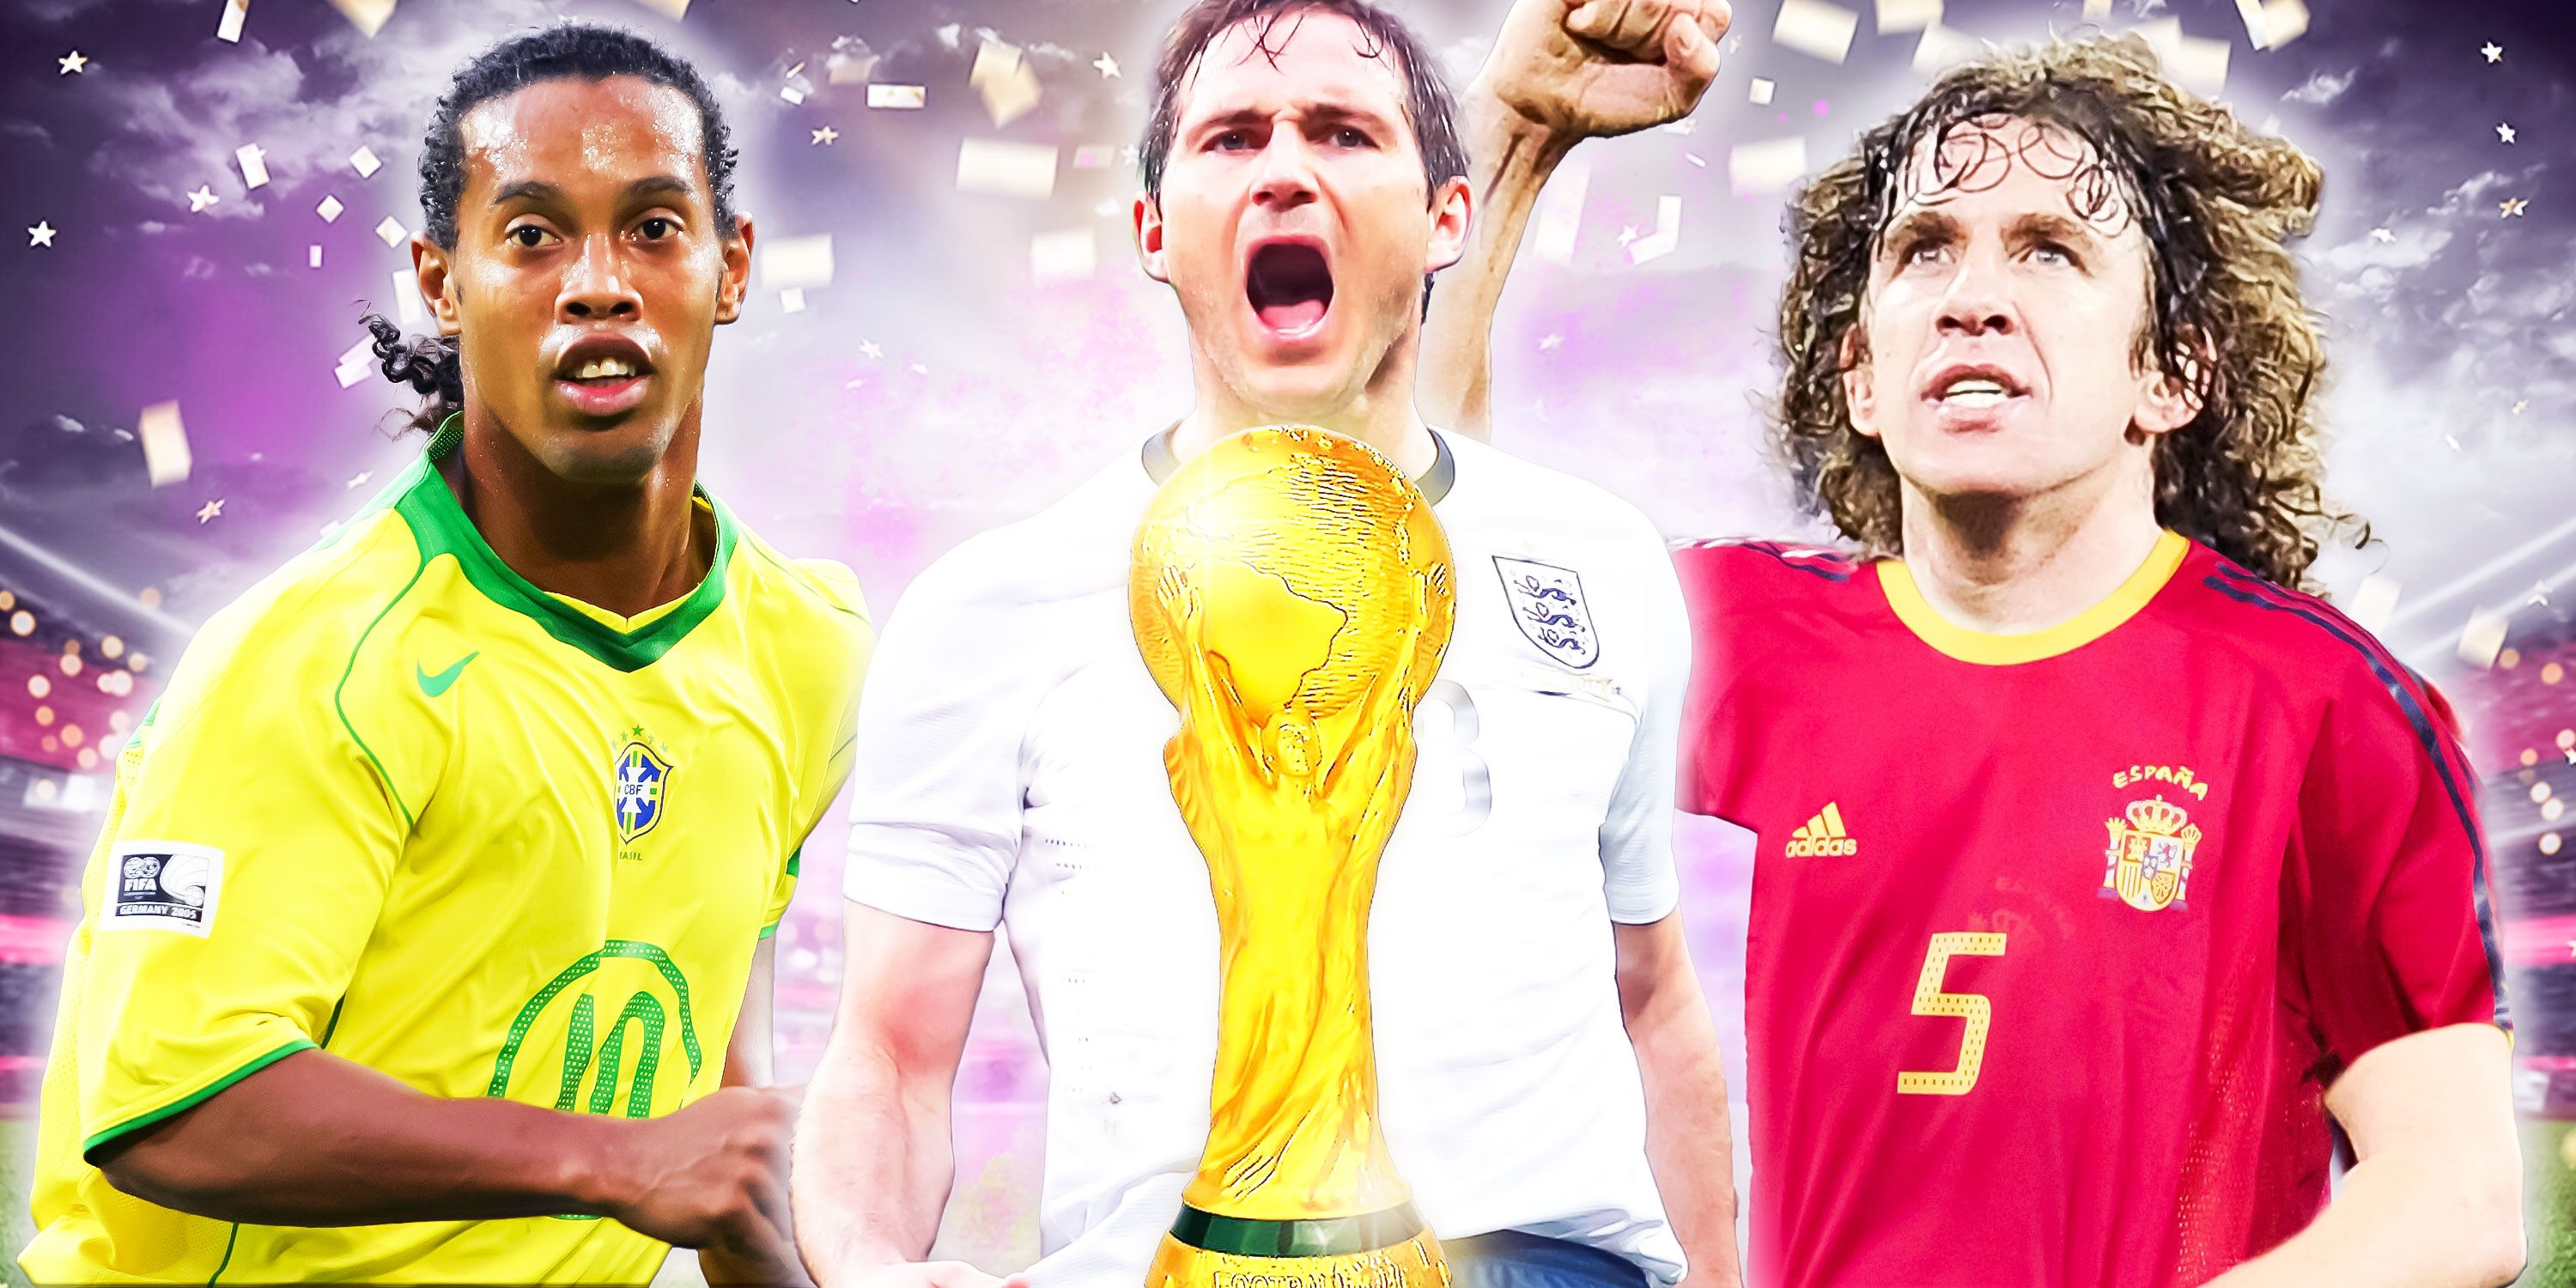 Ronaldinho, Frank Lampard and Carles Puyol are expected to play at the over 35s World Cup